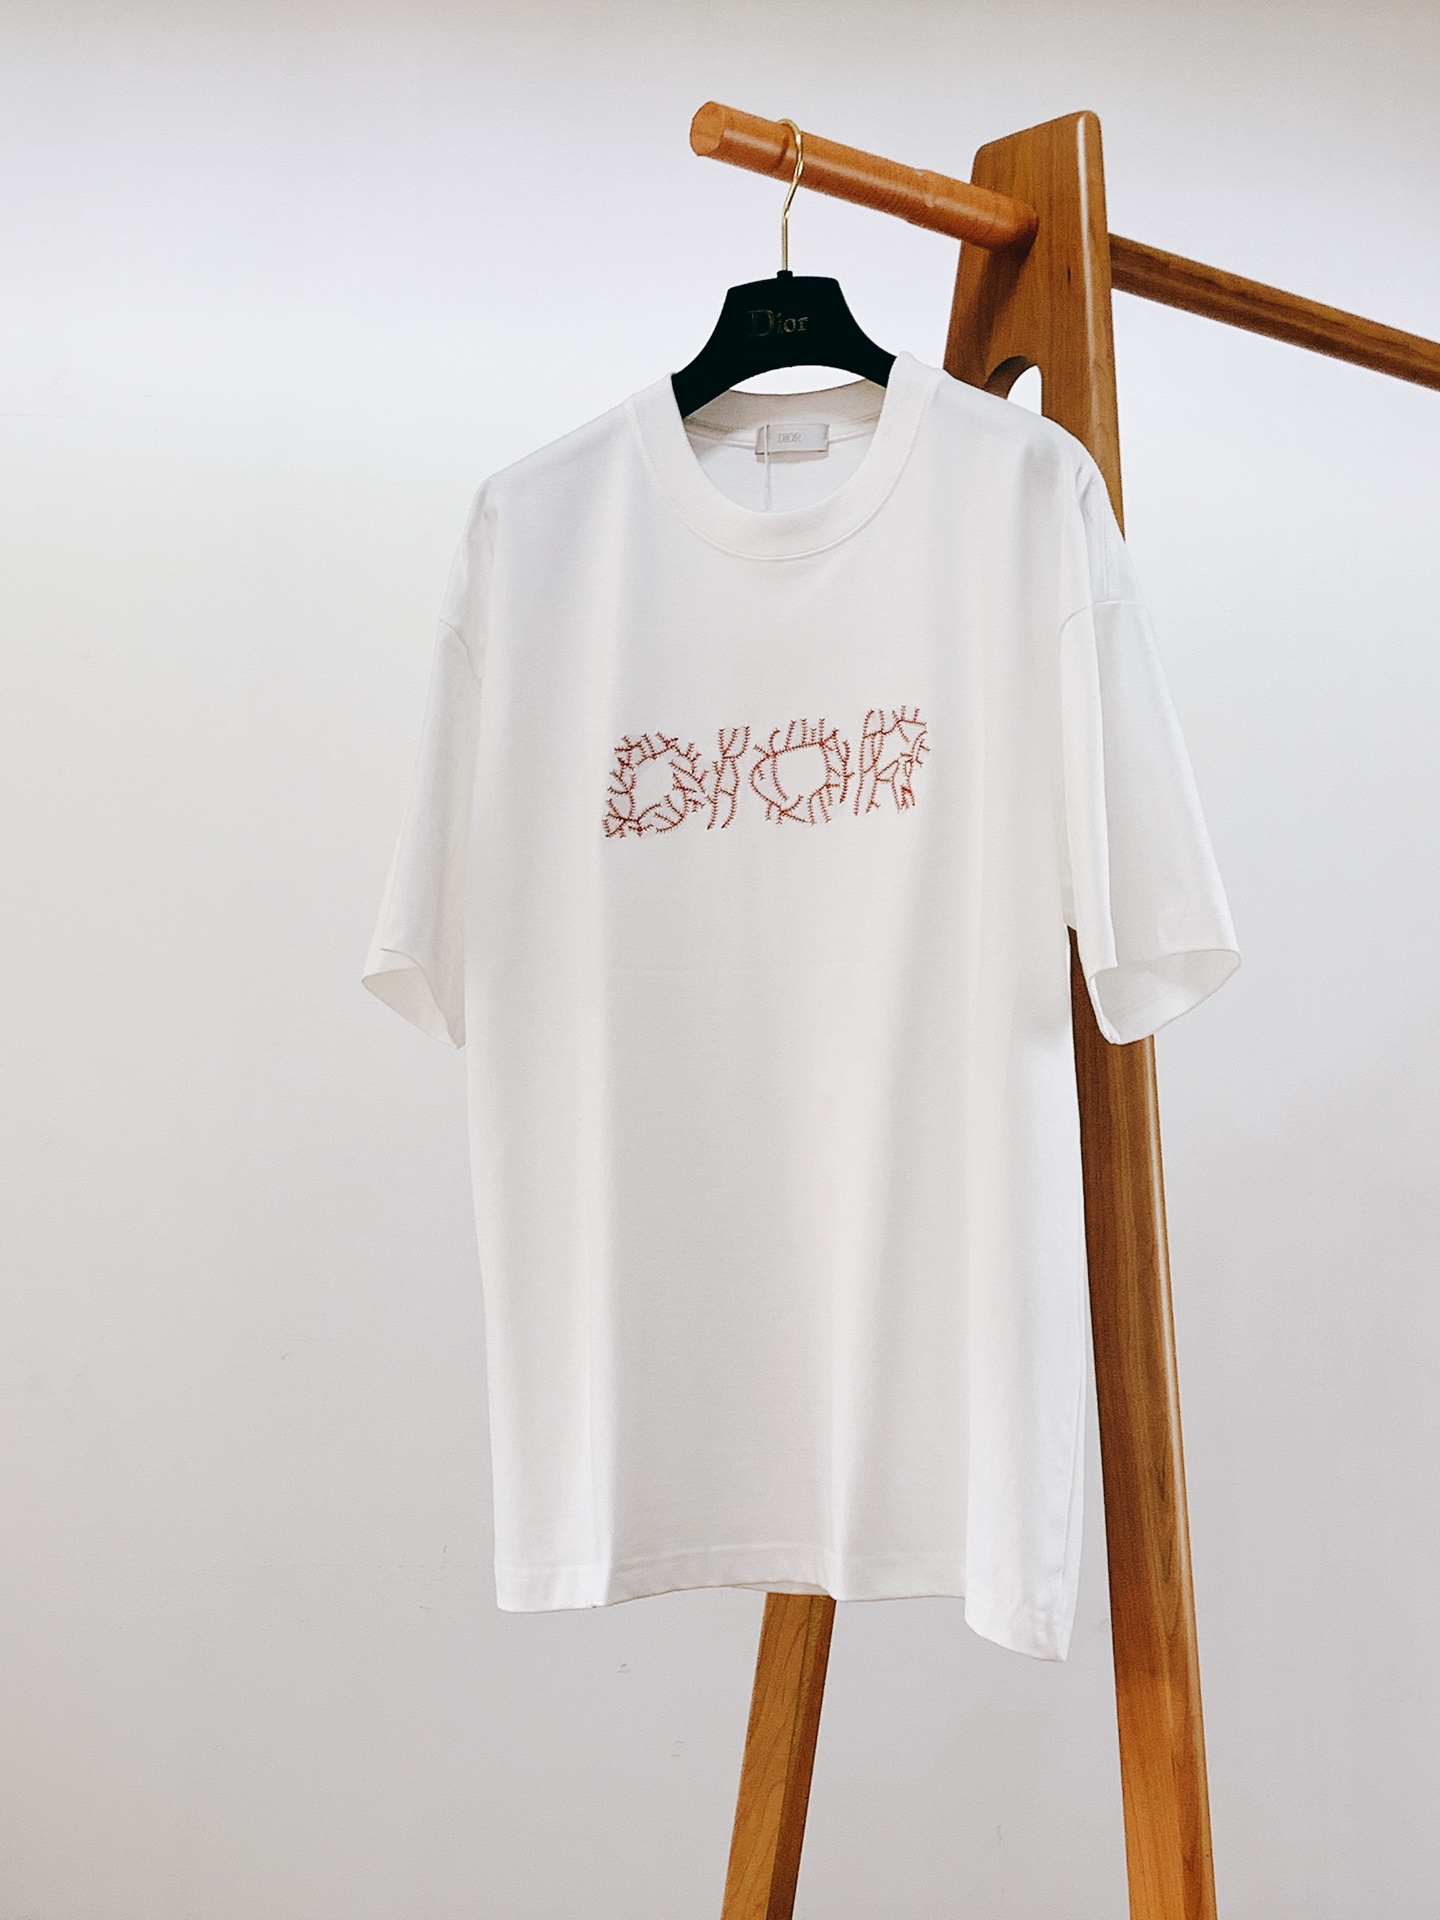 Dior Clothing T-Shirt Embroidery Cotton Knitting Spring/Summer Collection Fashion Short Sleeve